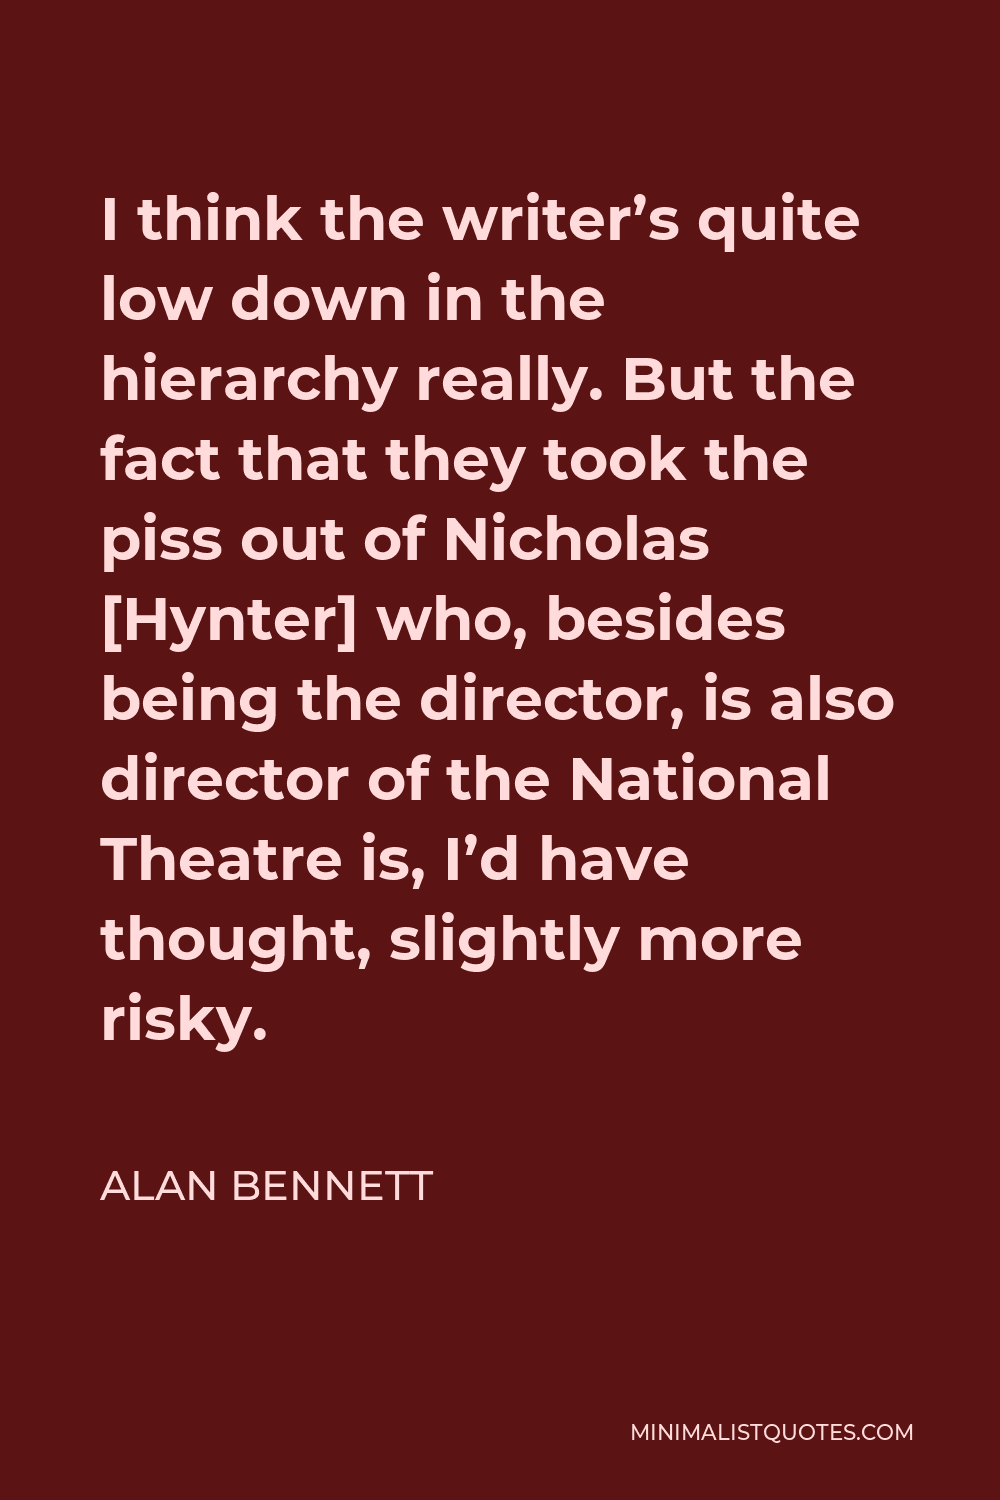 Alan Bennett Quote - I think the writer’s quite low down in the hierarchy really. But the fact that they took the piss out of Nicholas [Hynter] who, besides being the director, is also director of the National Theatre is, I’d have thought, slightly more risky.